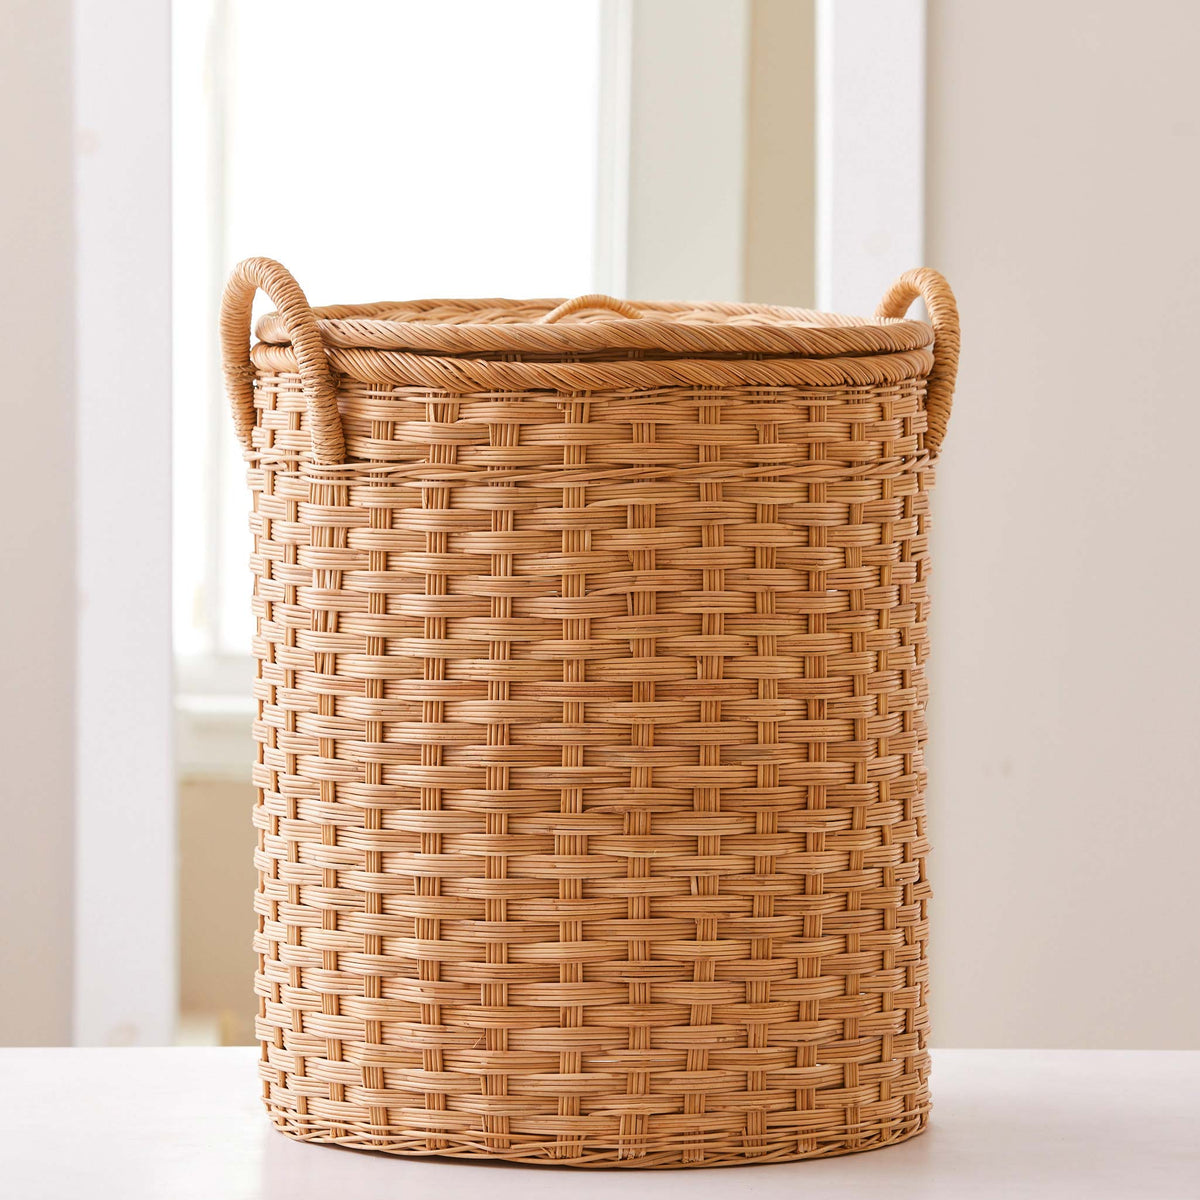 Oval rattan storage basket. Unique storage baskets with lids and handles. 5 sizes. Large basket shown. Great basket for storage. XL, L, M, S, XS.